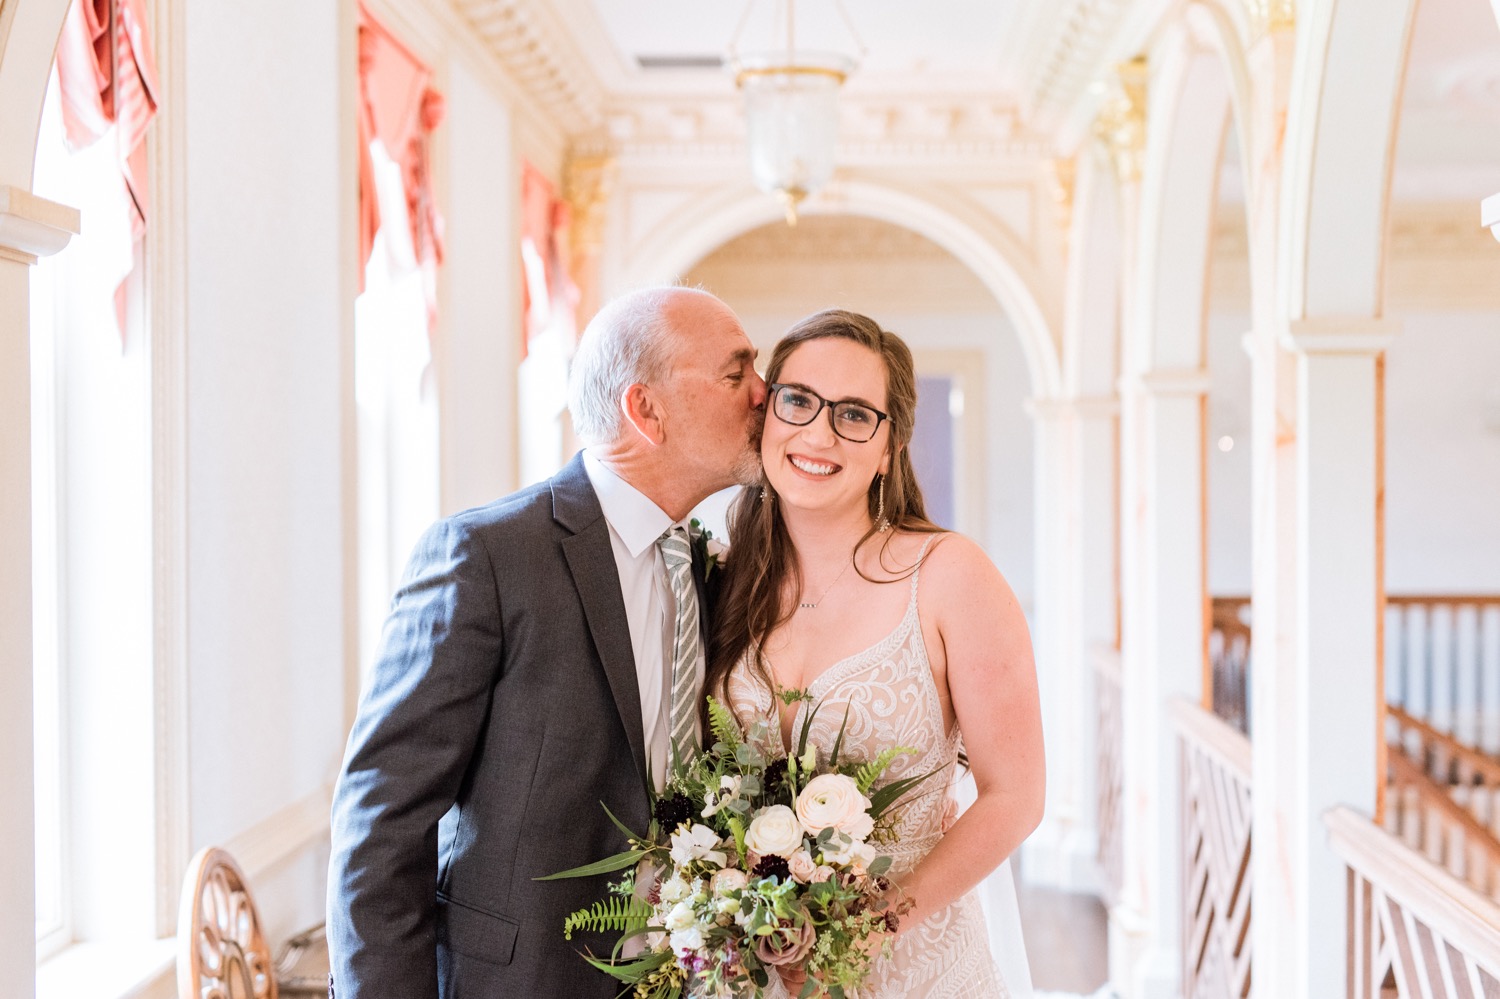 Bride and father share love and joy before wedding in Richmond Virginia